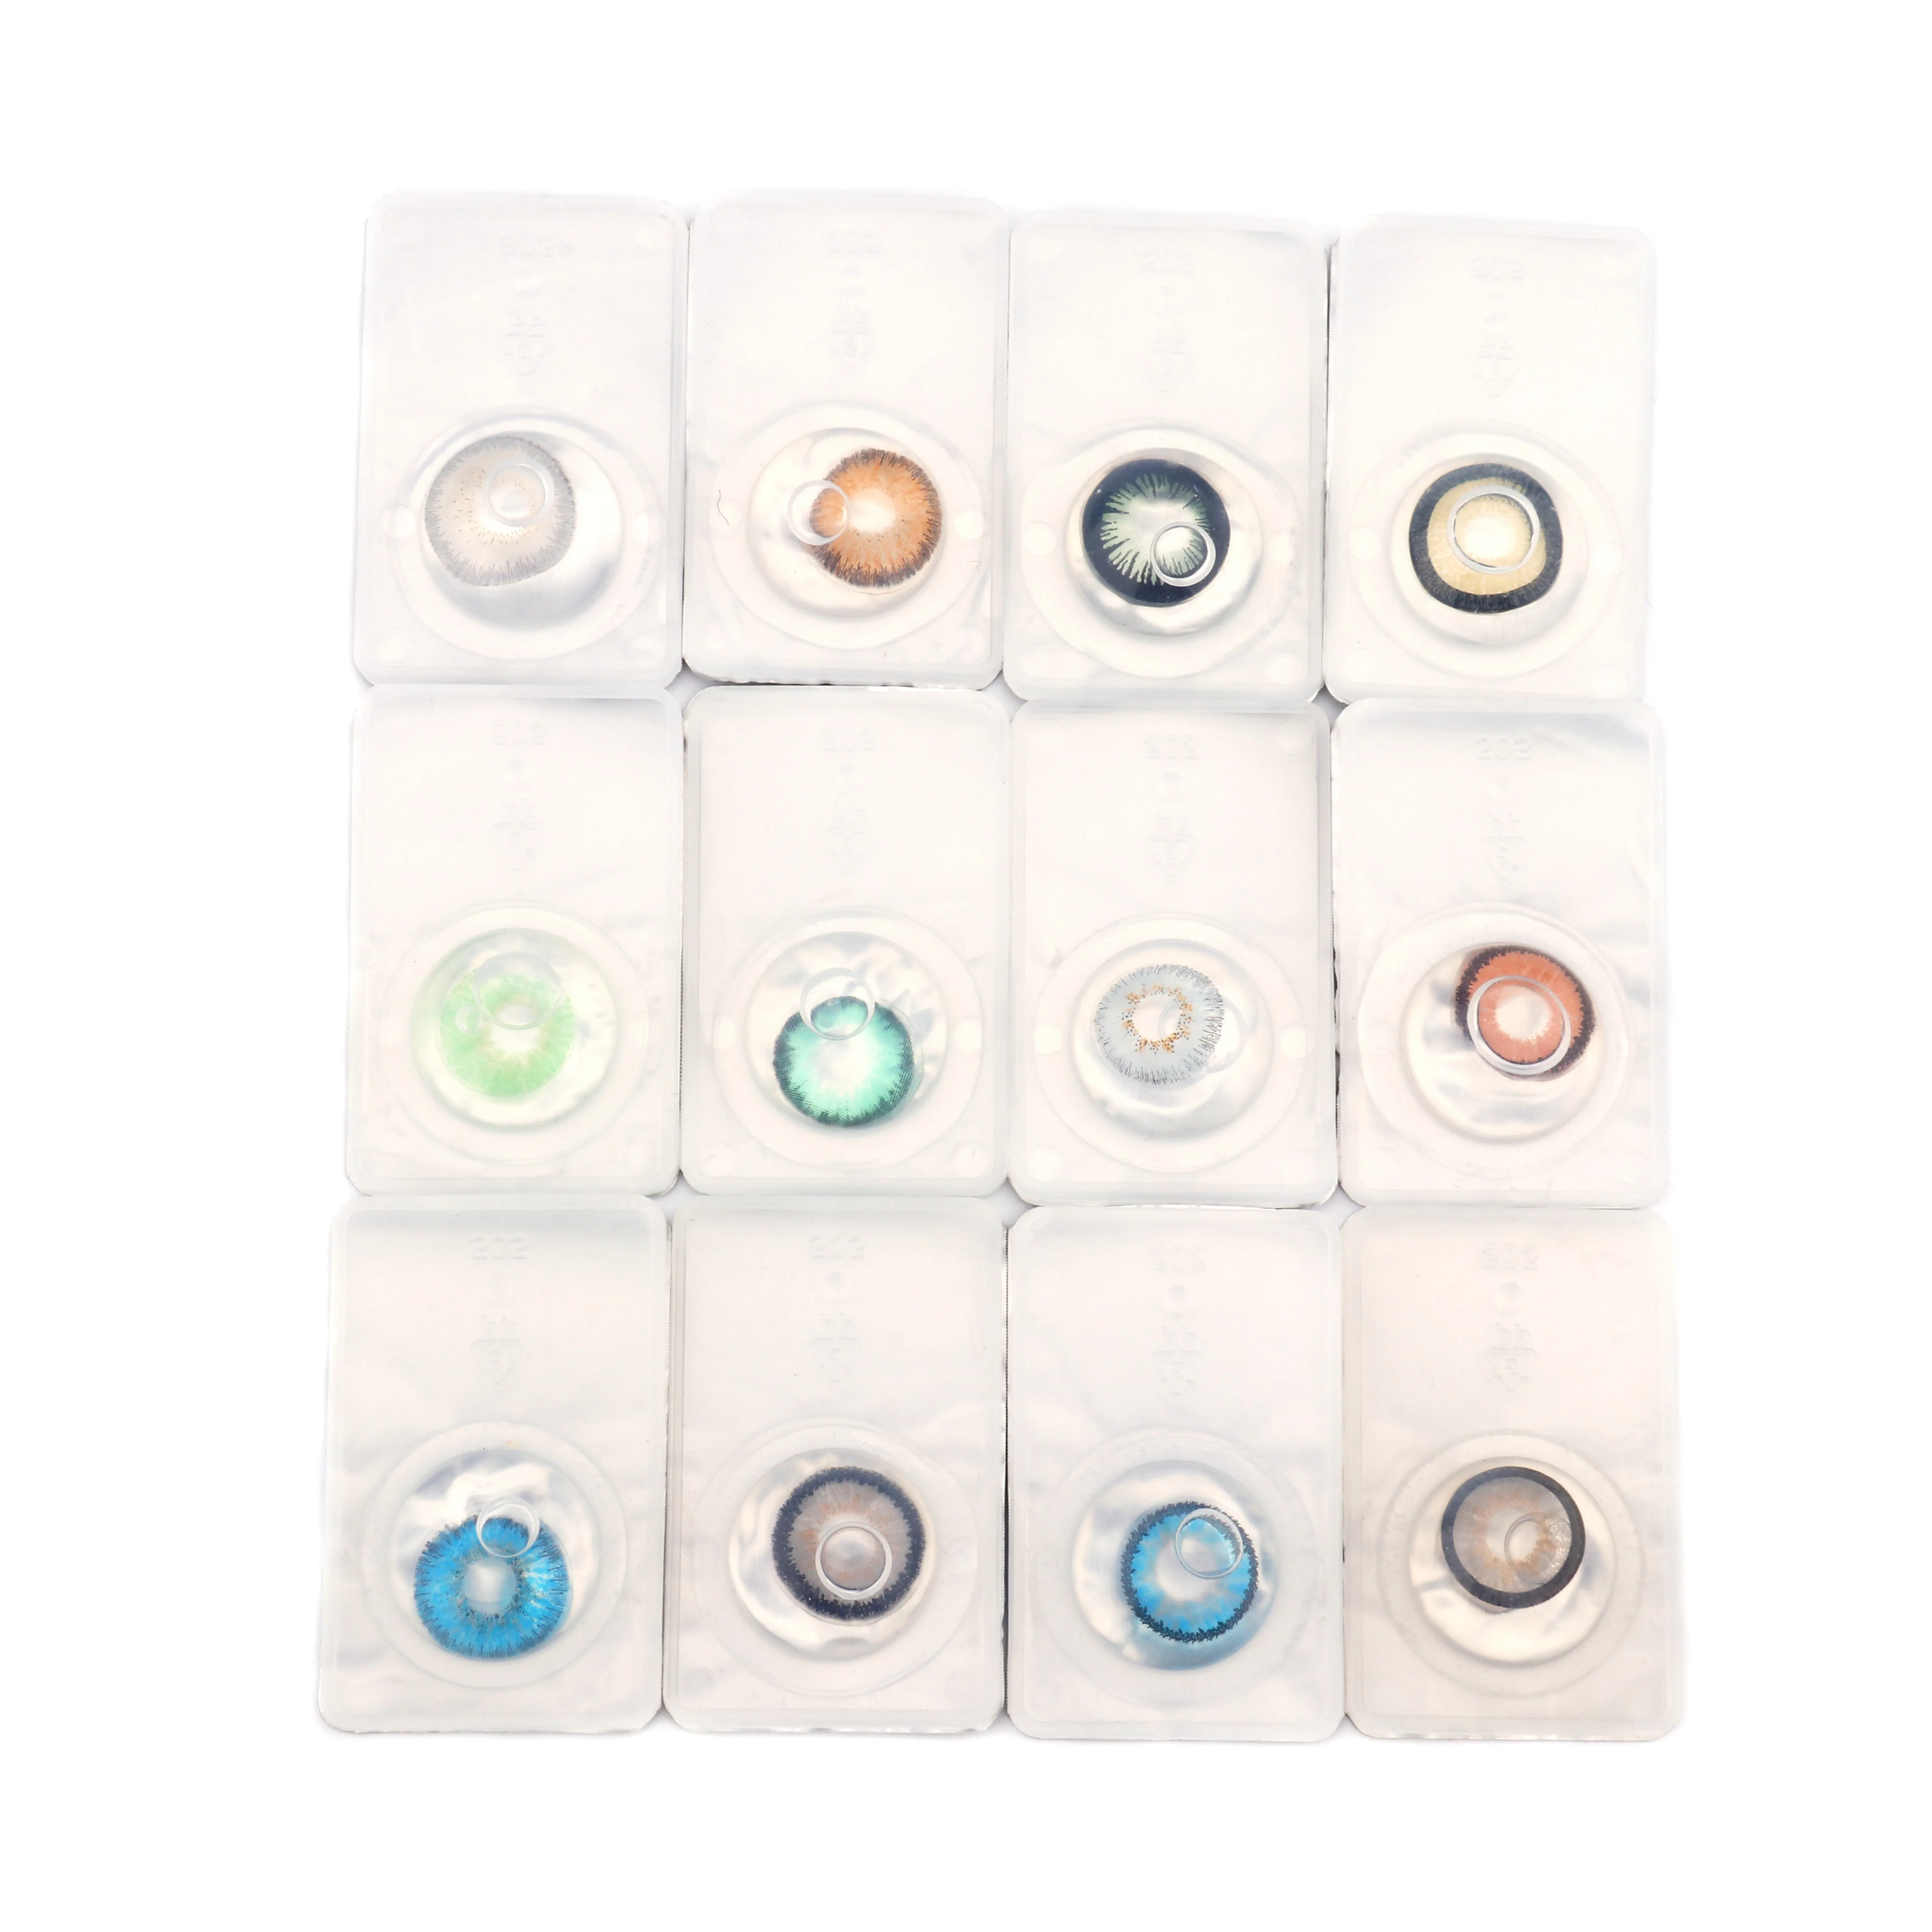 

2021 Hot Sale Fresh Color Yearly Wholesale Colored Contact Lens Soft Colored Circle Eye Contact Lenses Magic GAN Picture, Multi